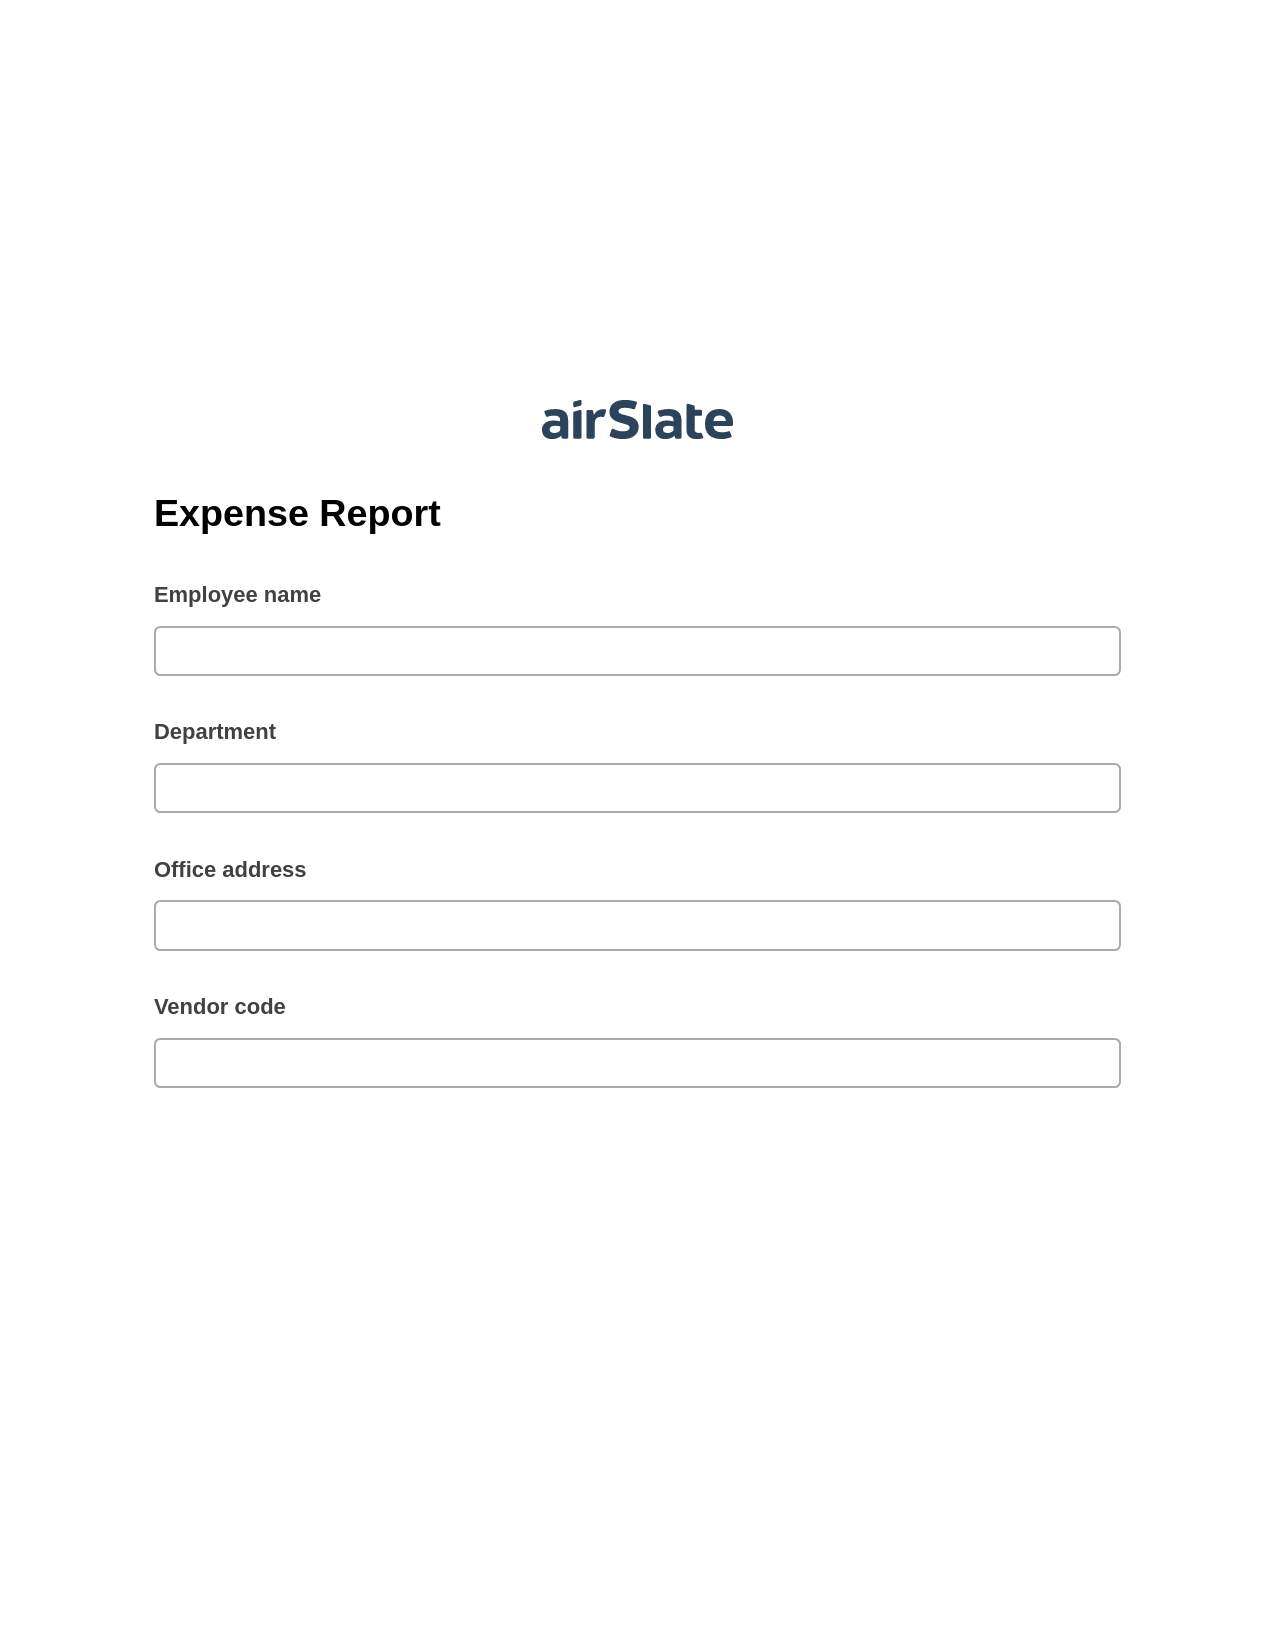 Expense Report Pre-fill from NetSuite Records Bot, Audit Trail Bot, Export to Google Sheet Bot